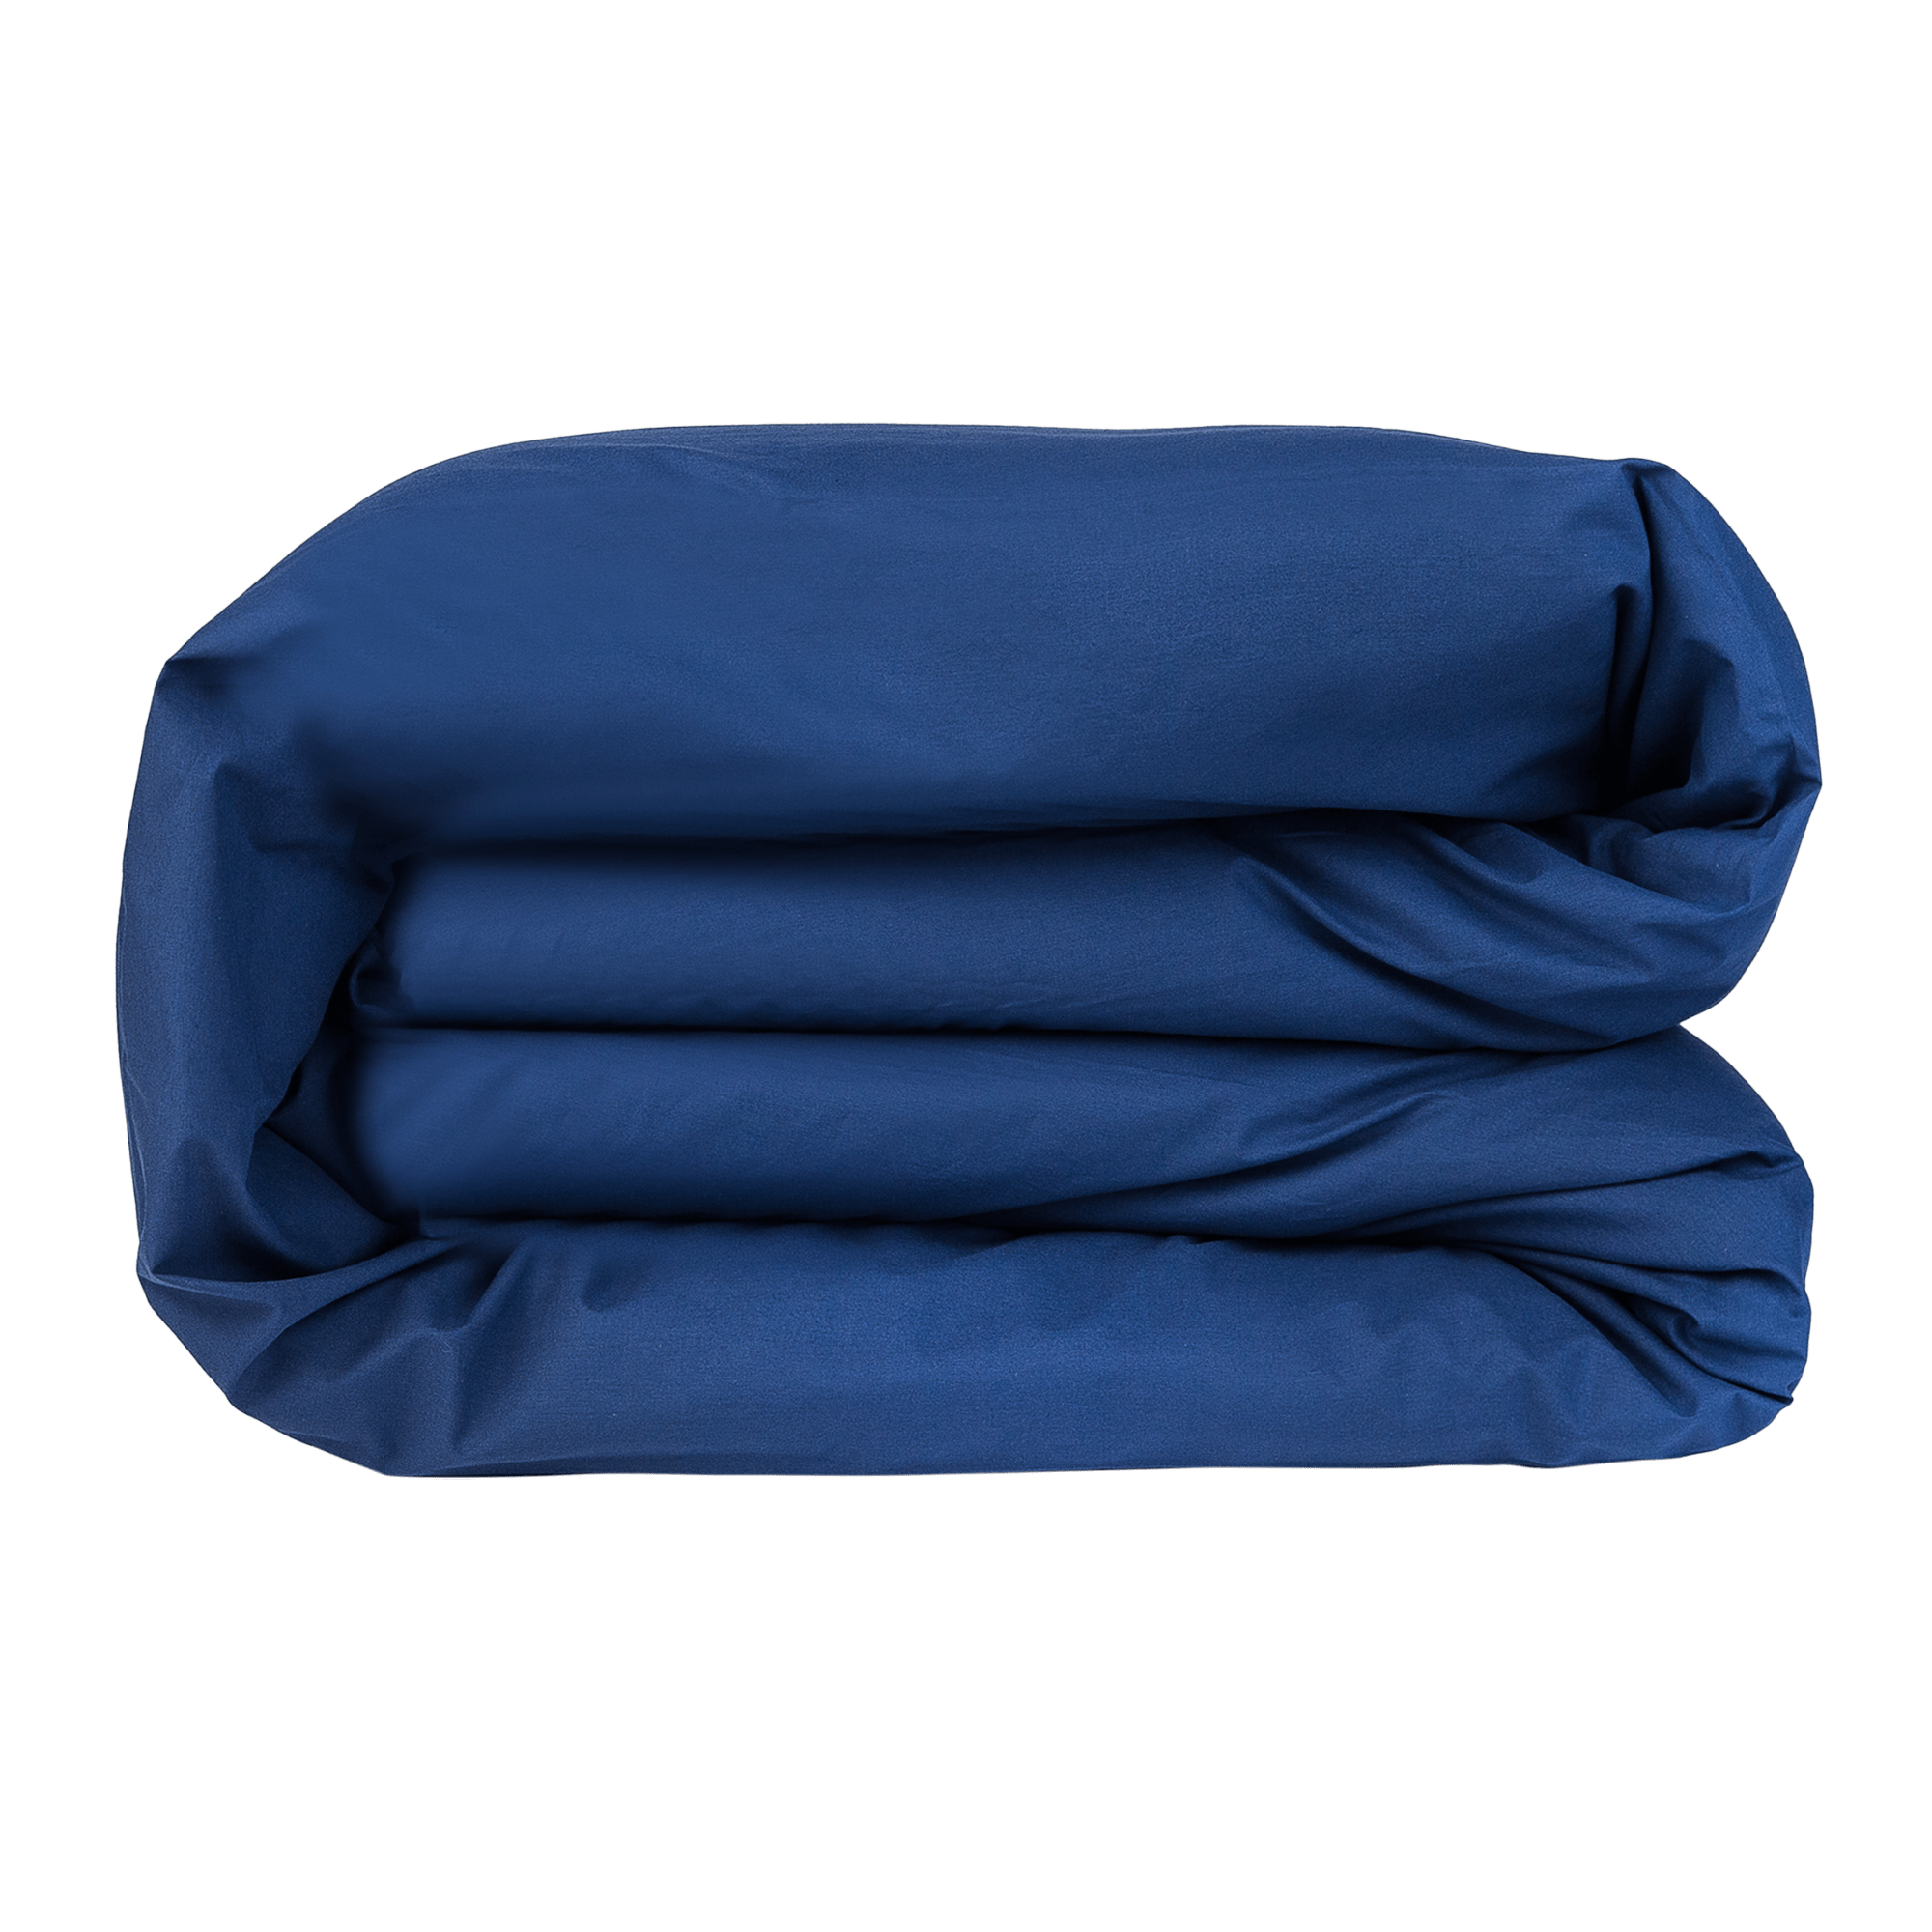 Navy Folded Percale Duvet Cover